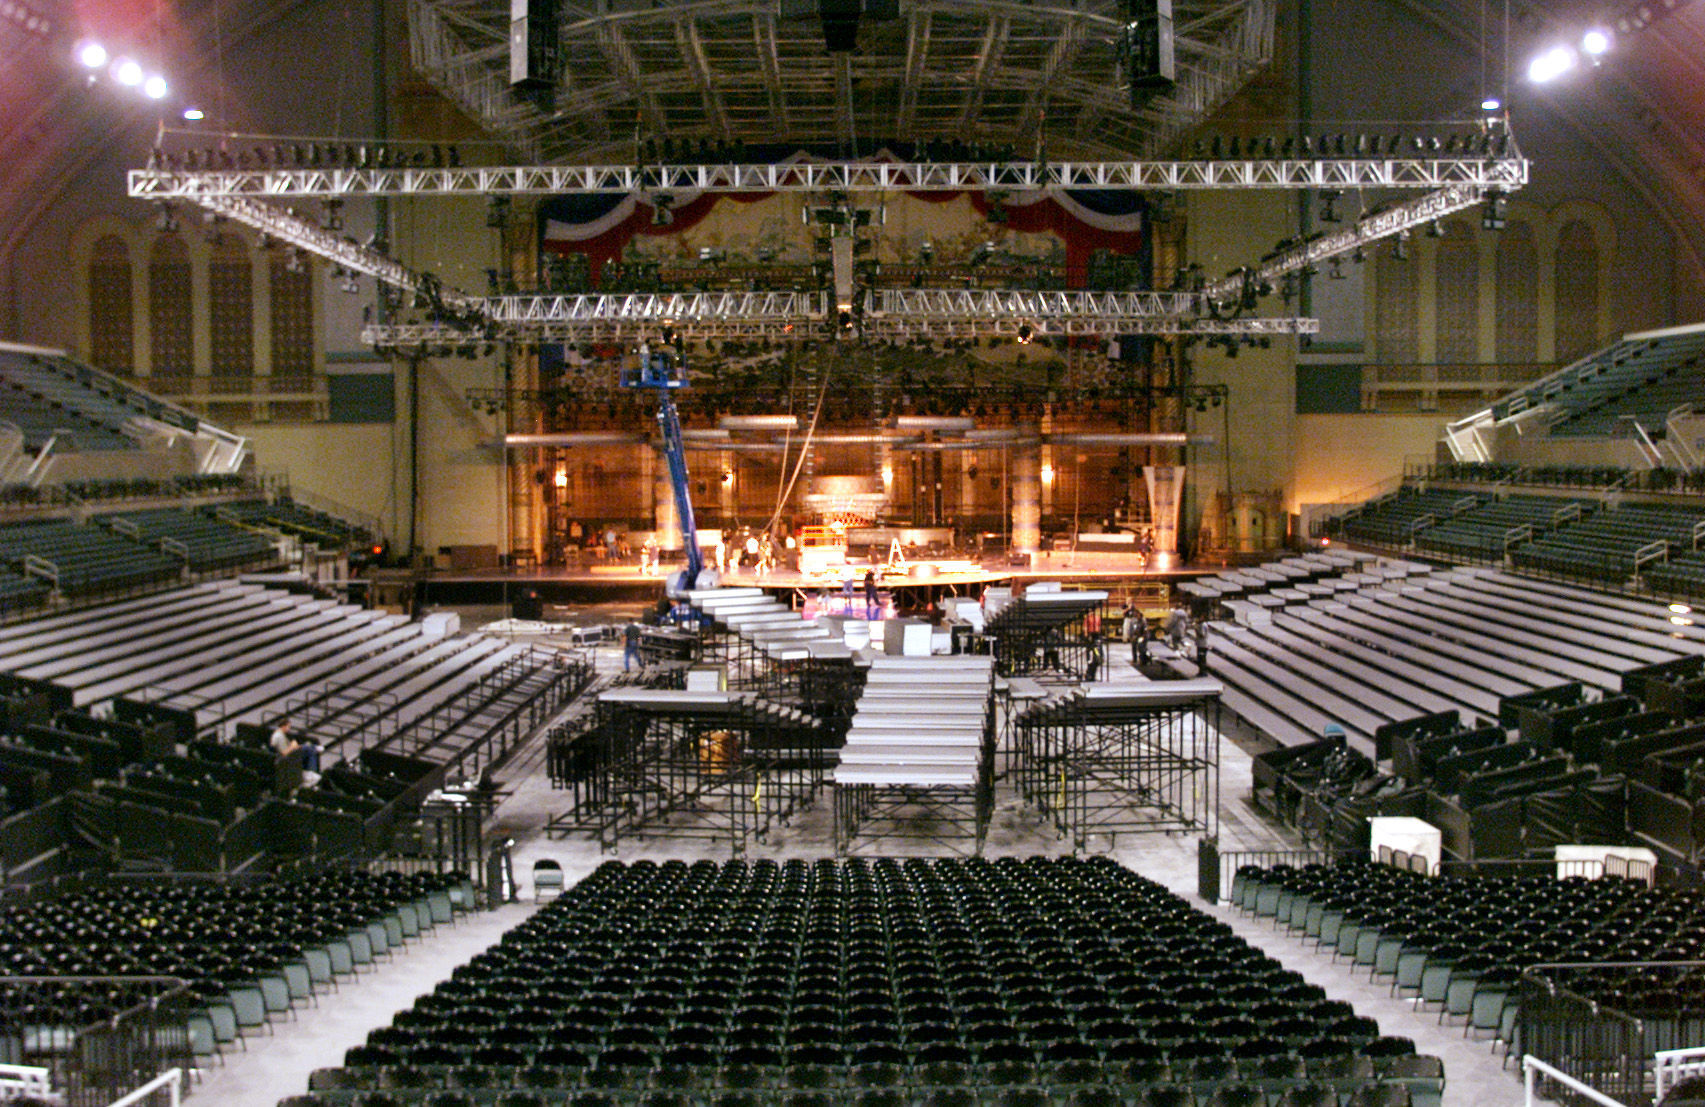 Boardwalk Hall Seating Chart Concerts